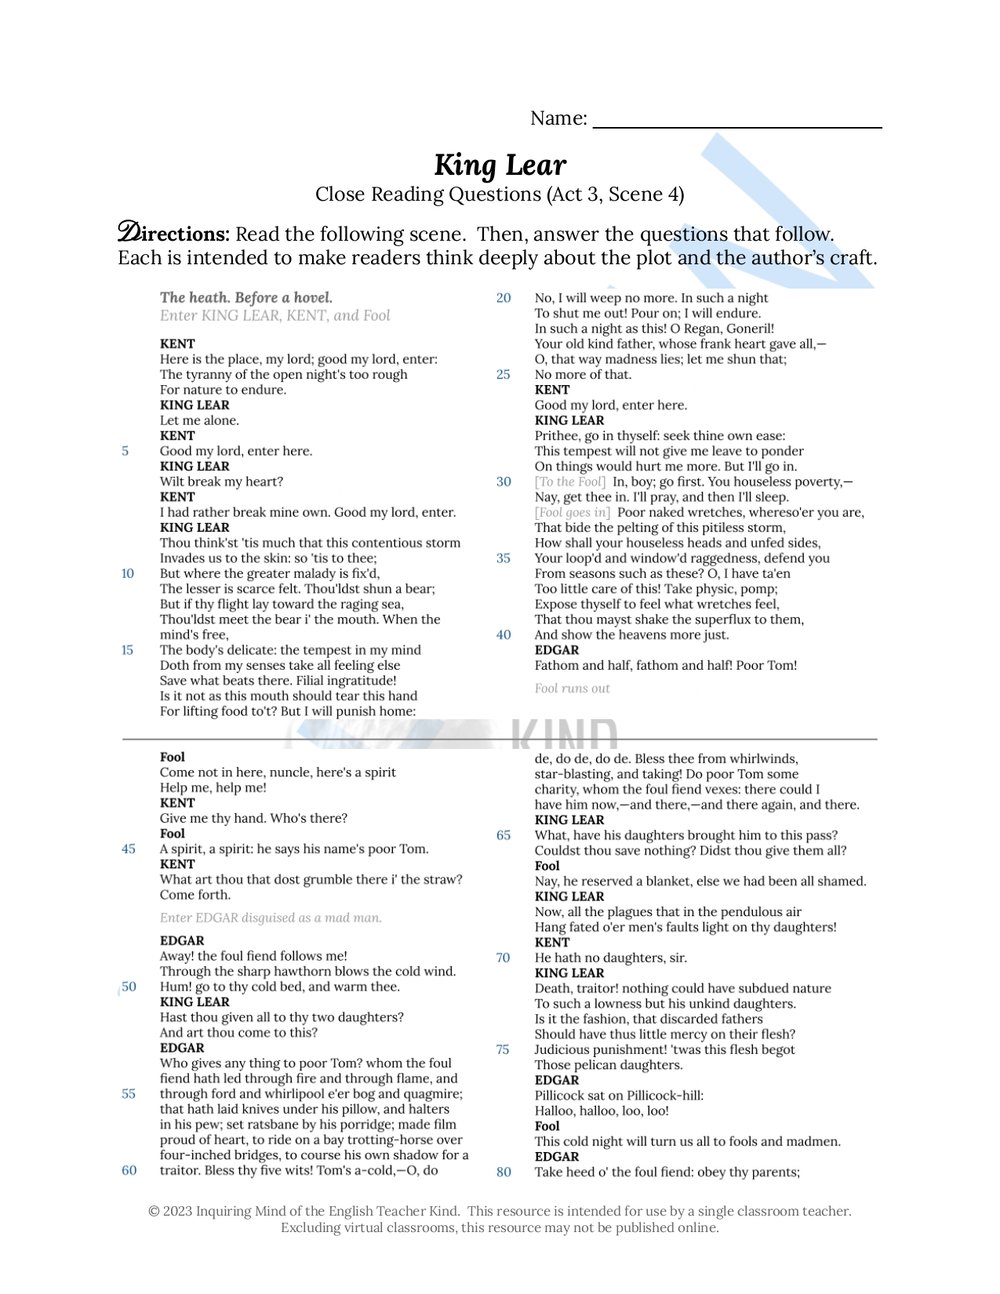 King Lear Act 3 Quiz and Close Reading Analysis Worksheets Bundle